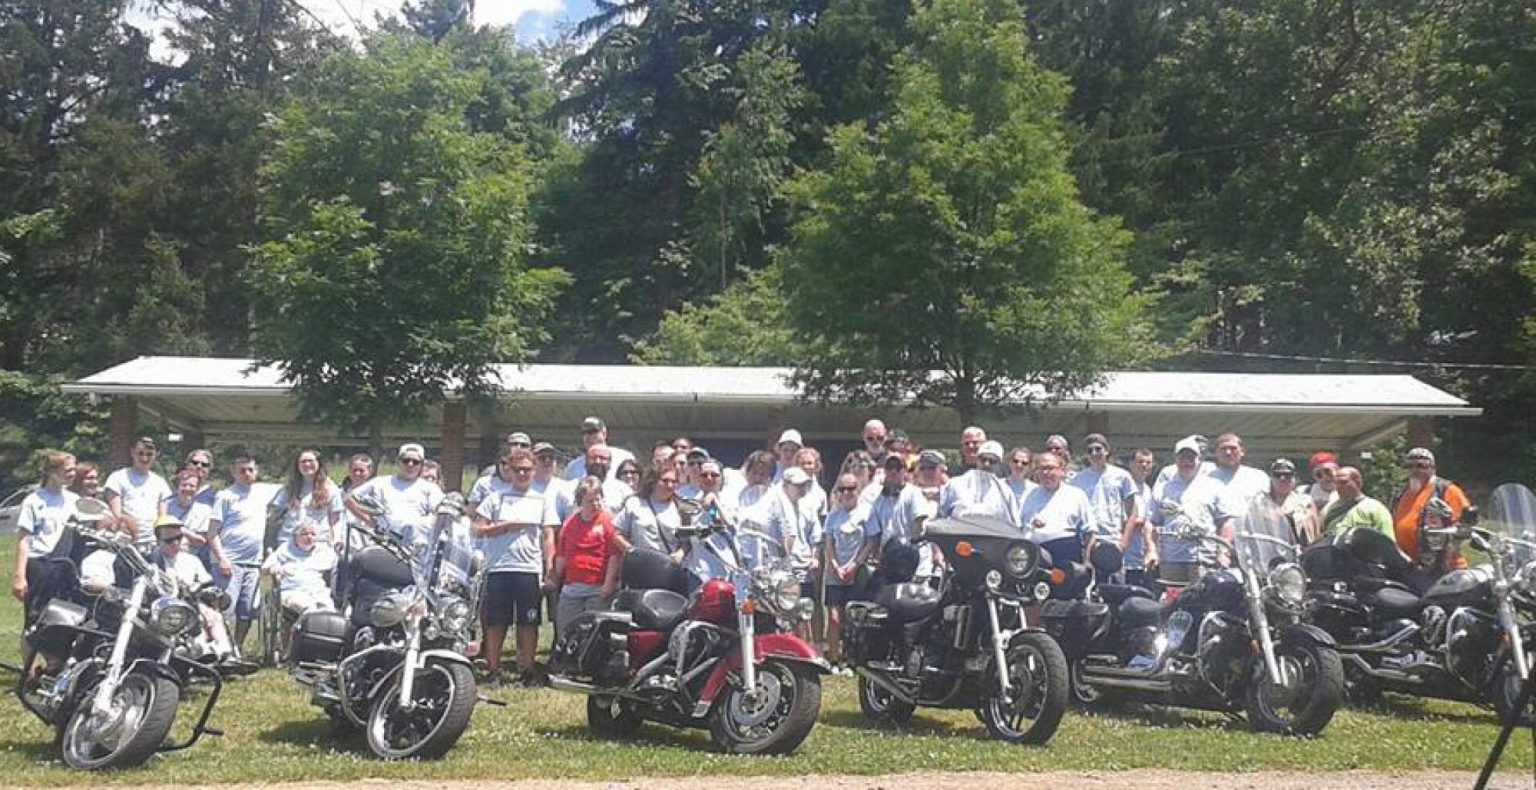 2022 Blessing of Bikes Indiana County A.B.A.T.E. of PA